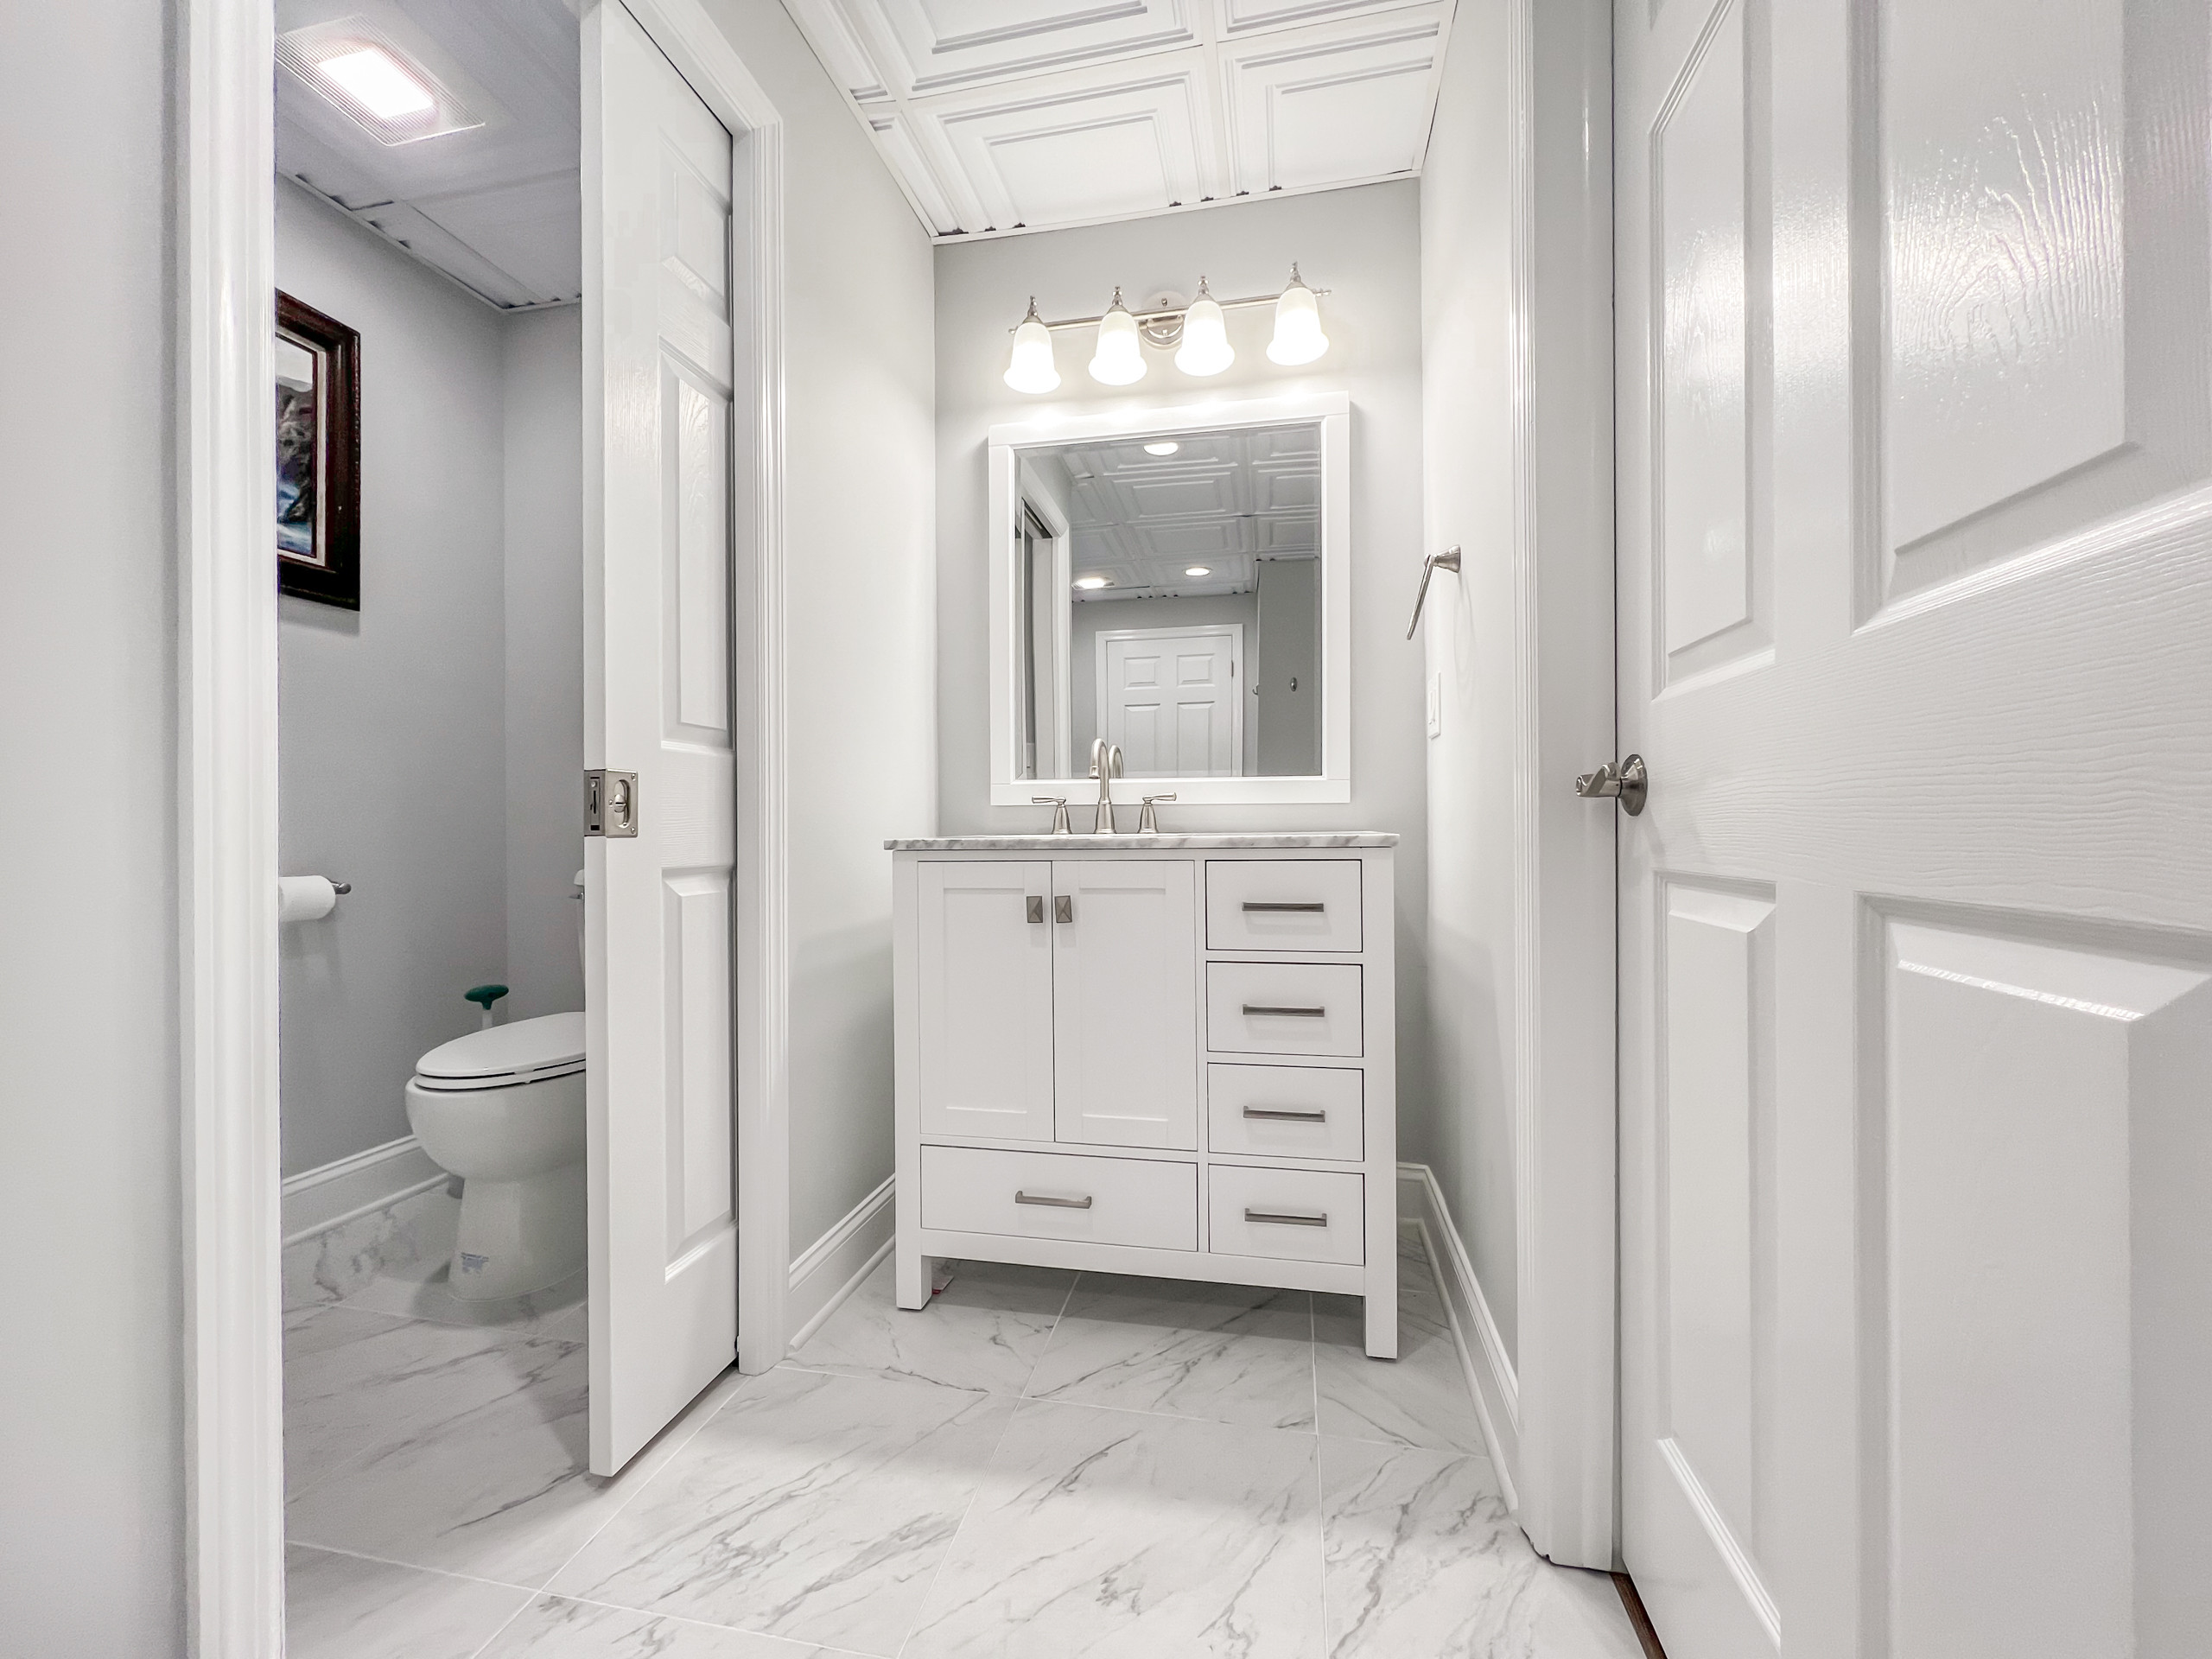 Featured Projects - Bathroom Build in Basement